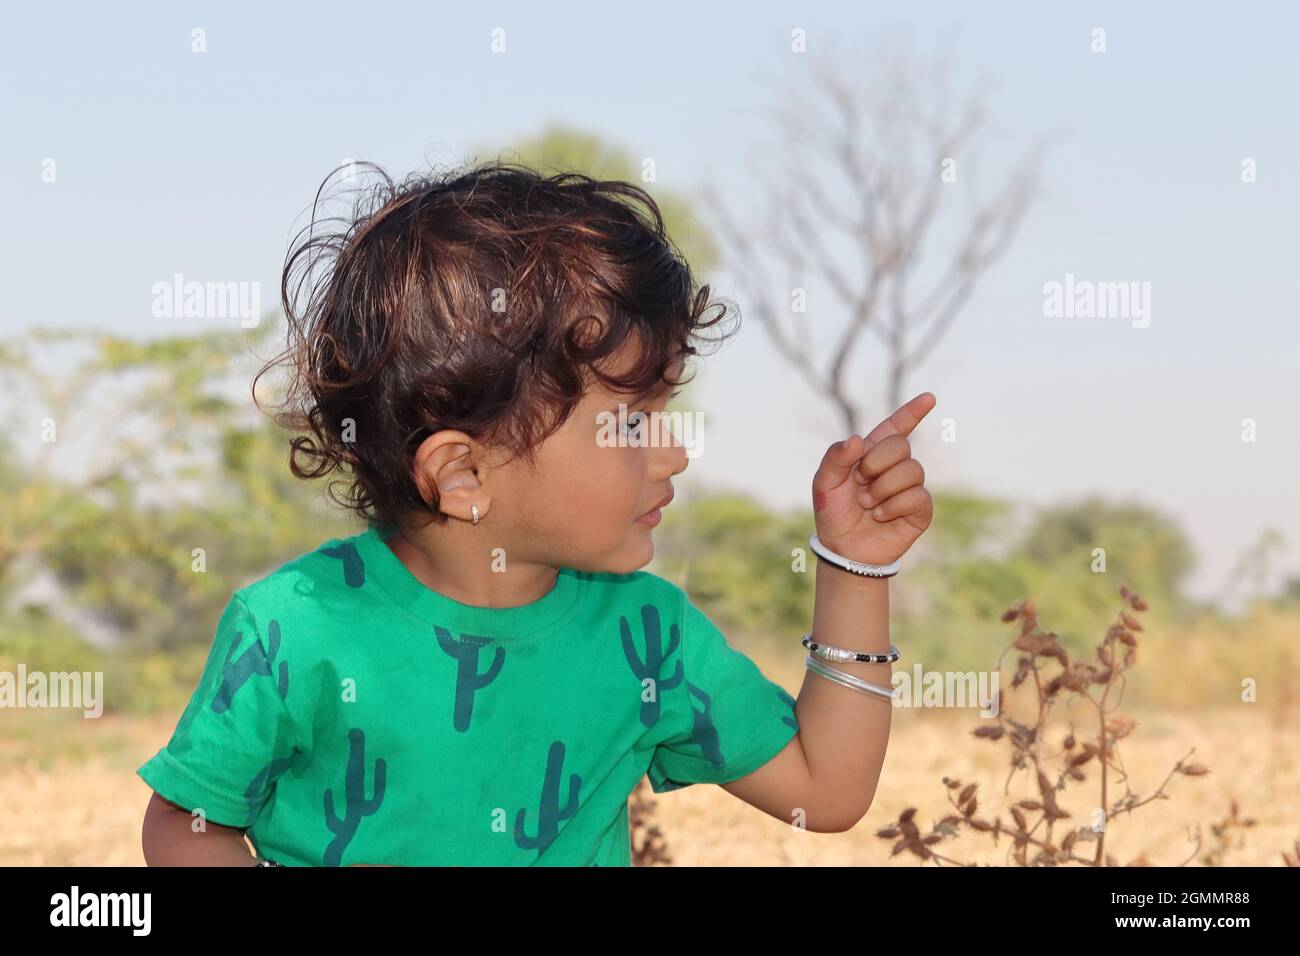 Close-up profile view portrait of A small cute Indian Hindu child wearing a green shirt stands outside, showing a distant object with a finger gesture Stock Photo